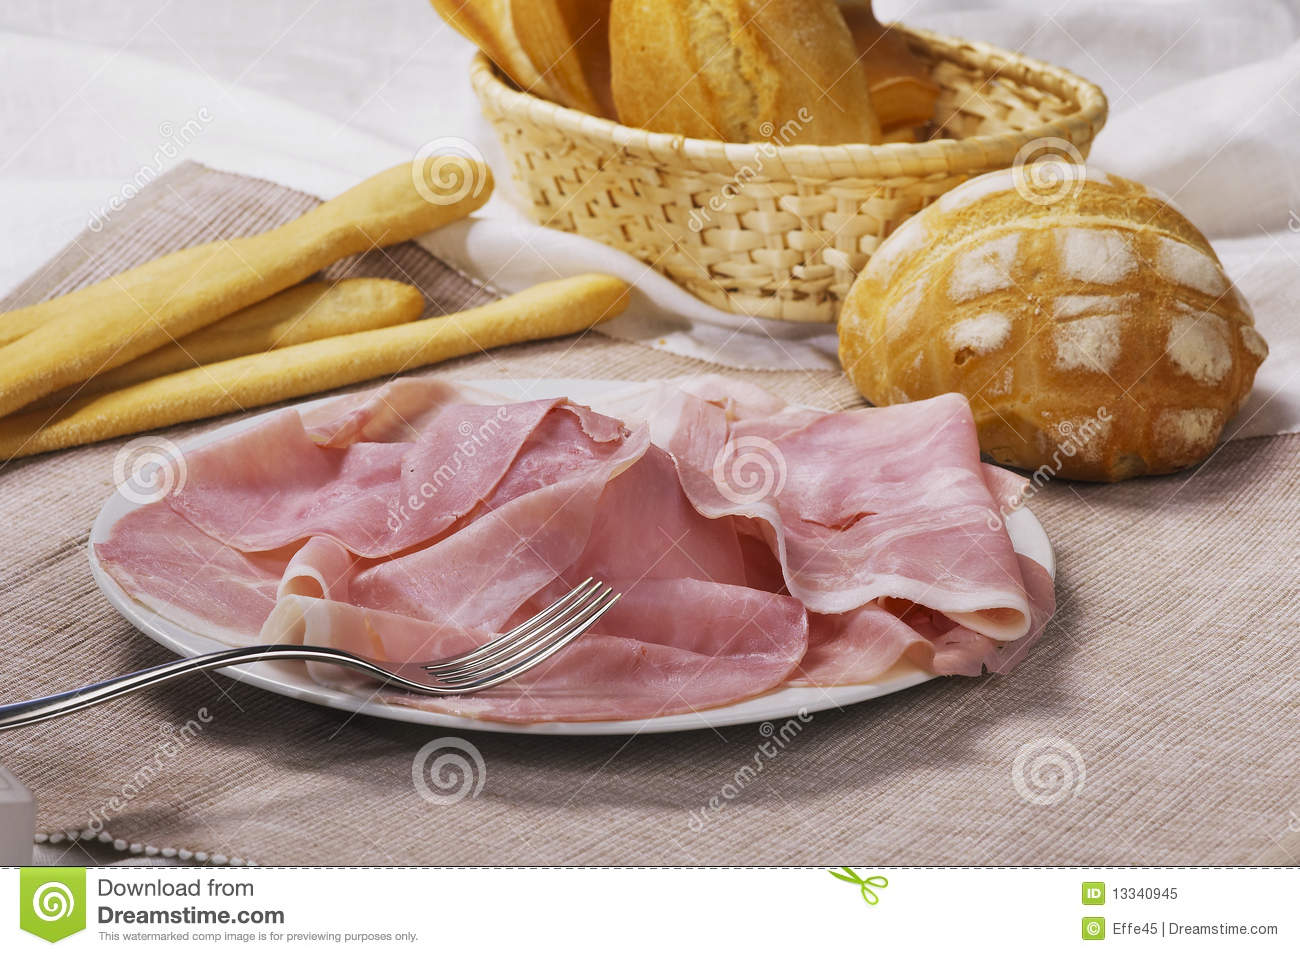 Cooked Ham Royalty Free Stock Photo   Image  13340945